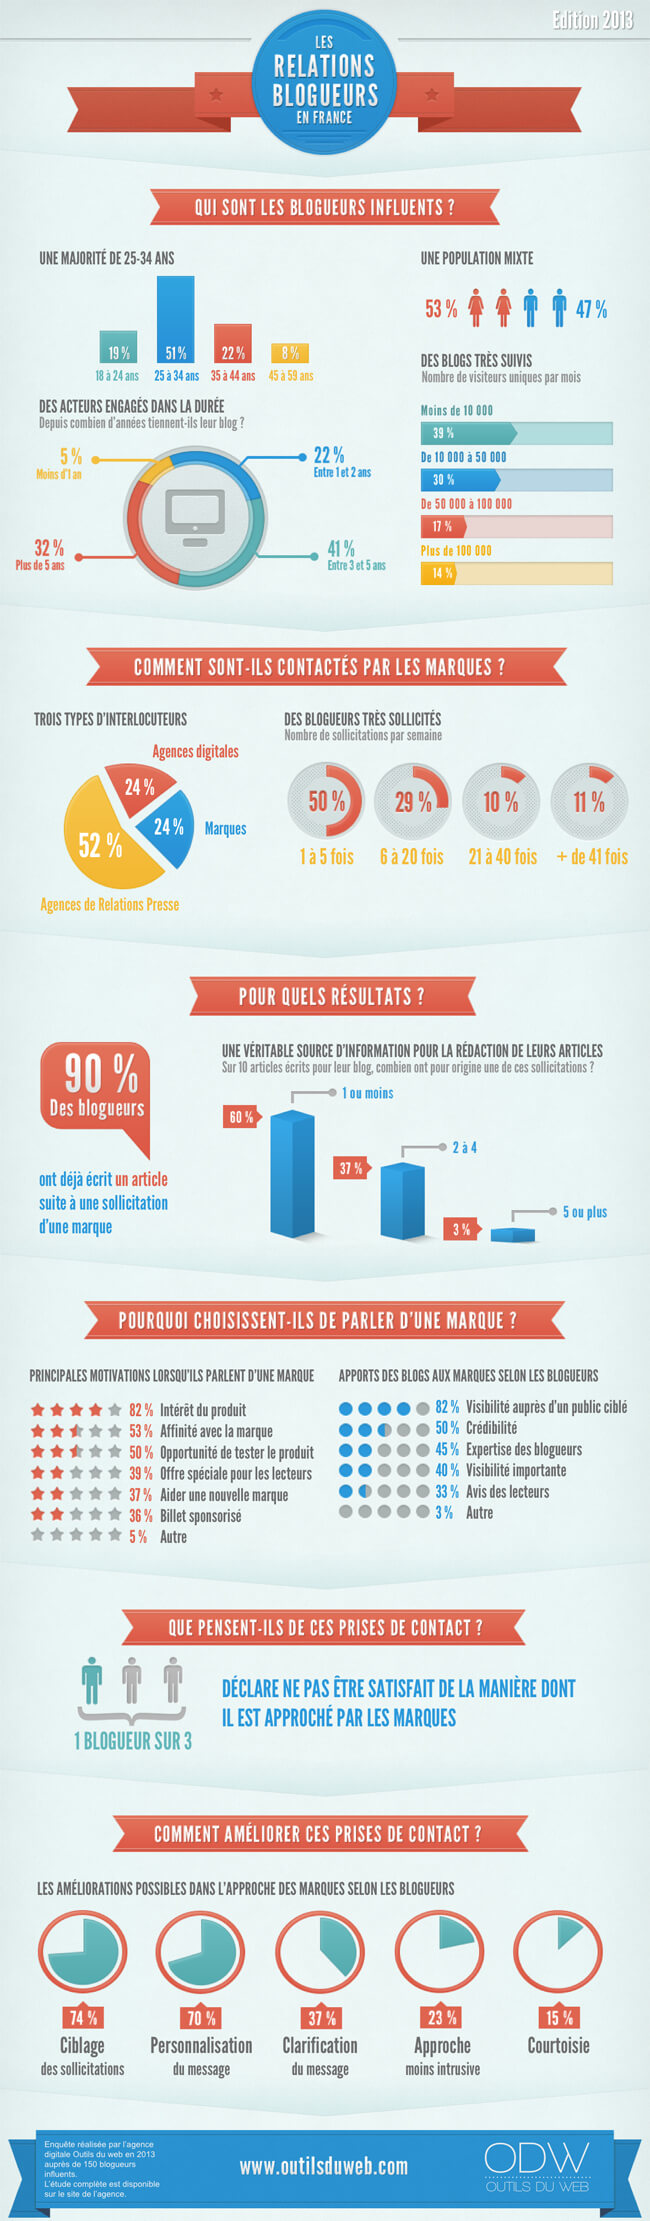 Infographie : relations blogueurs